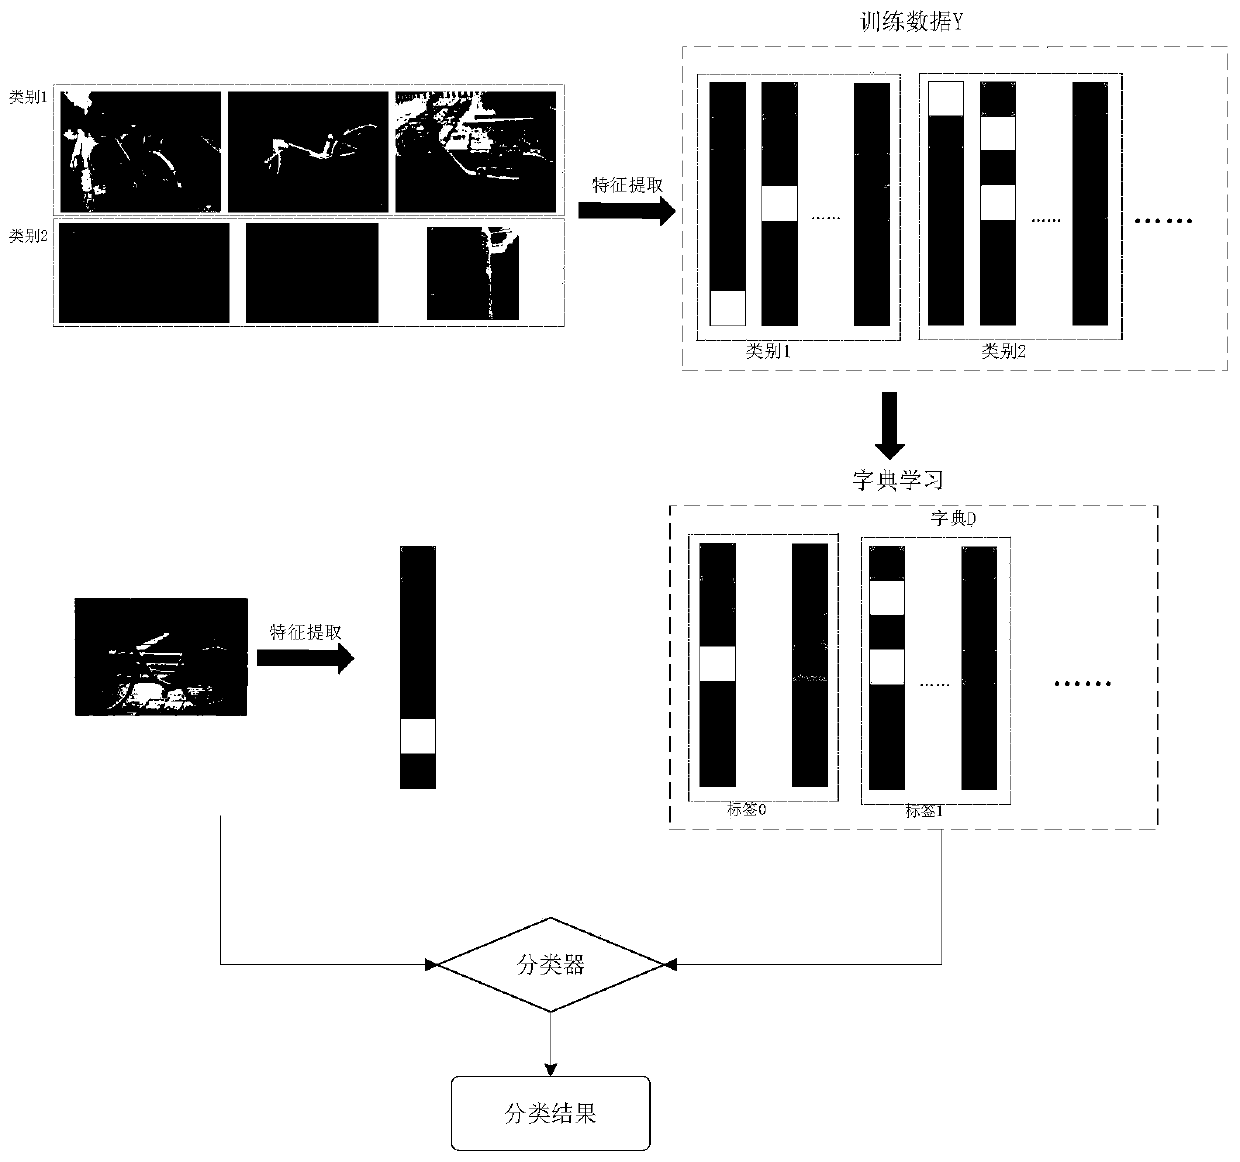 Urban management case image recognition method based on dictionary learning